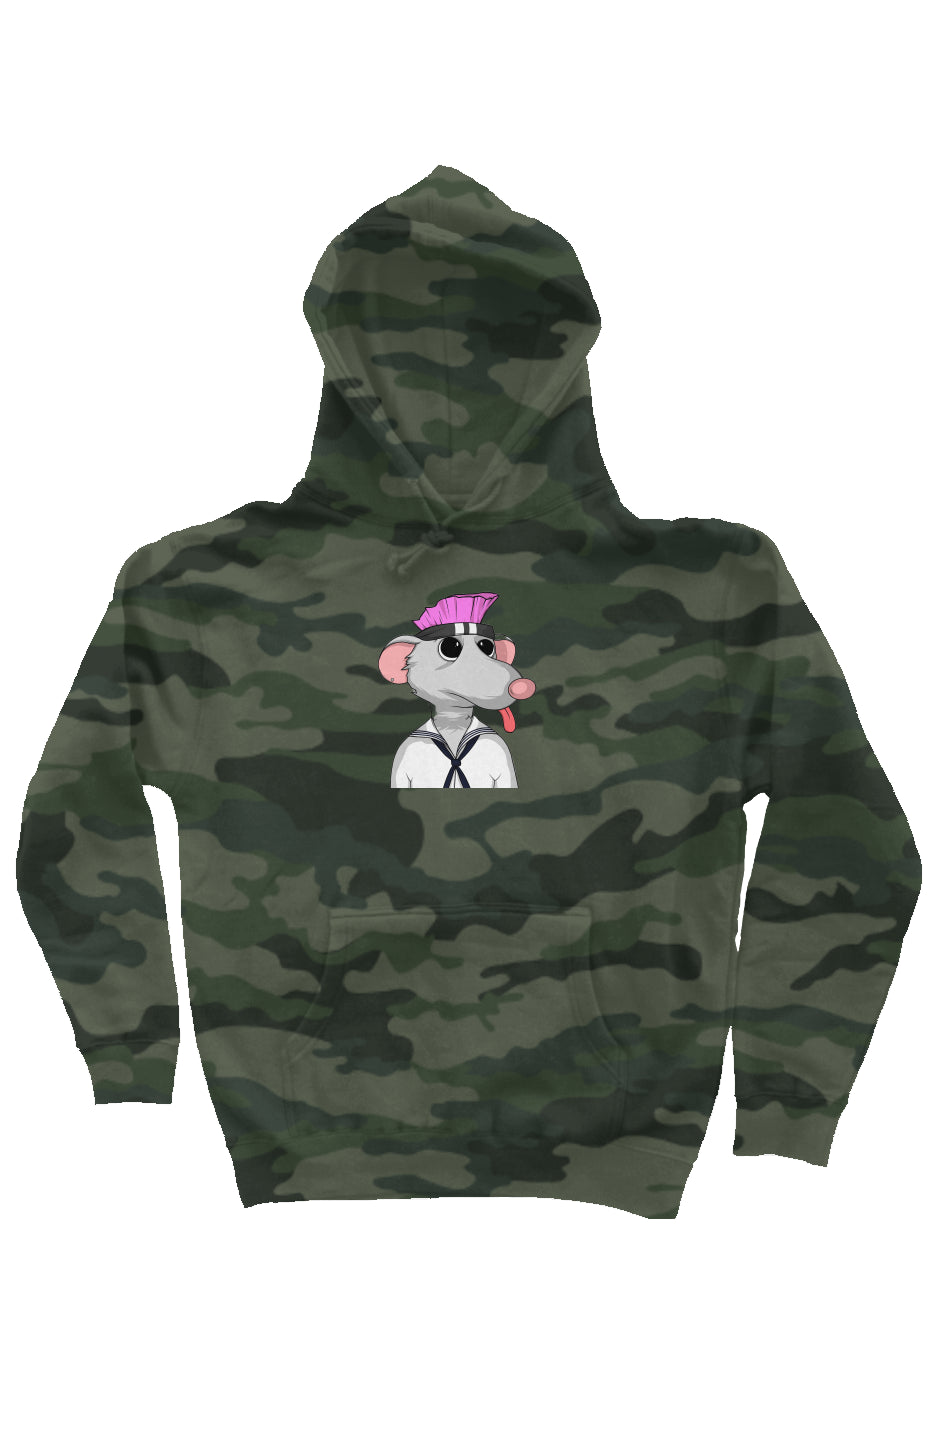 Camo Independent Heavyweight Hoodie feat Fat Rat #500